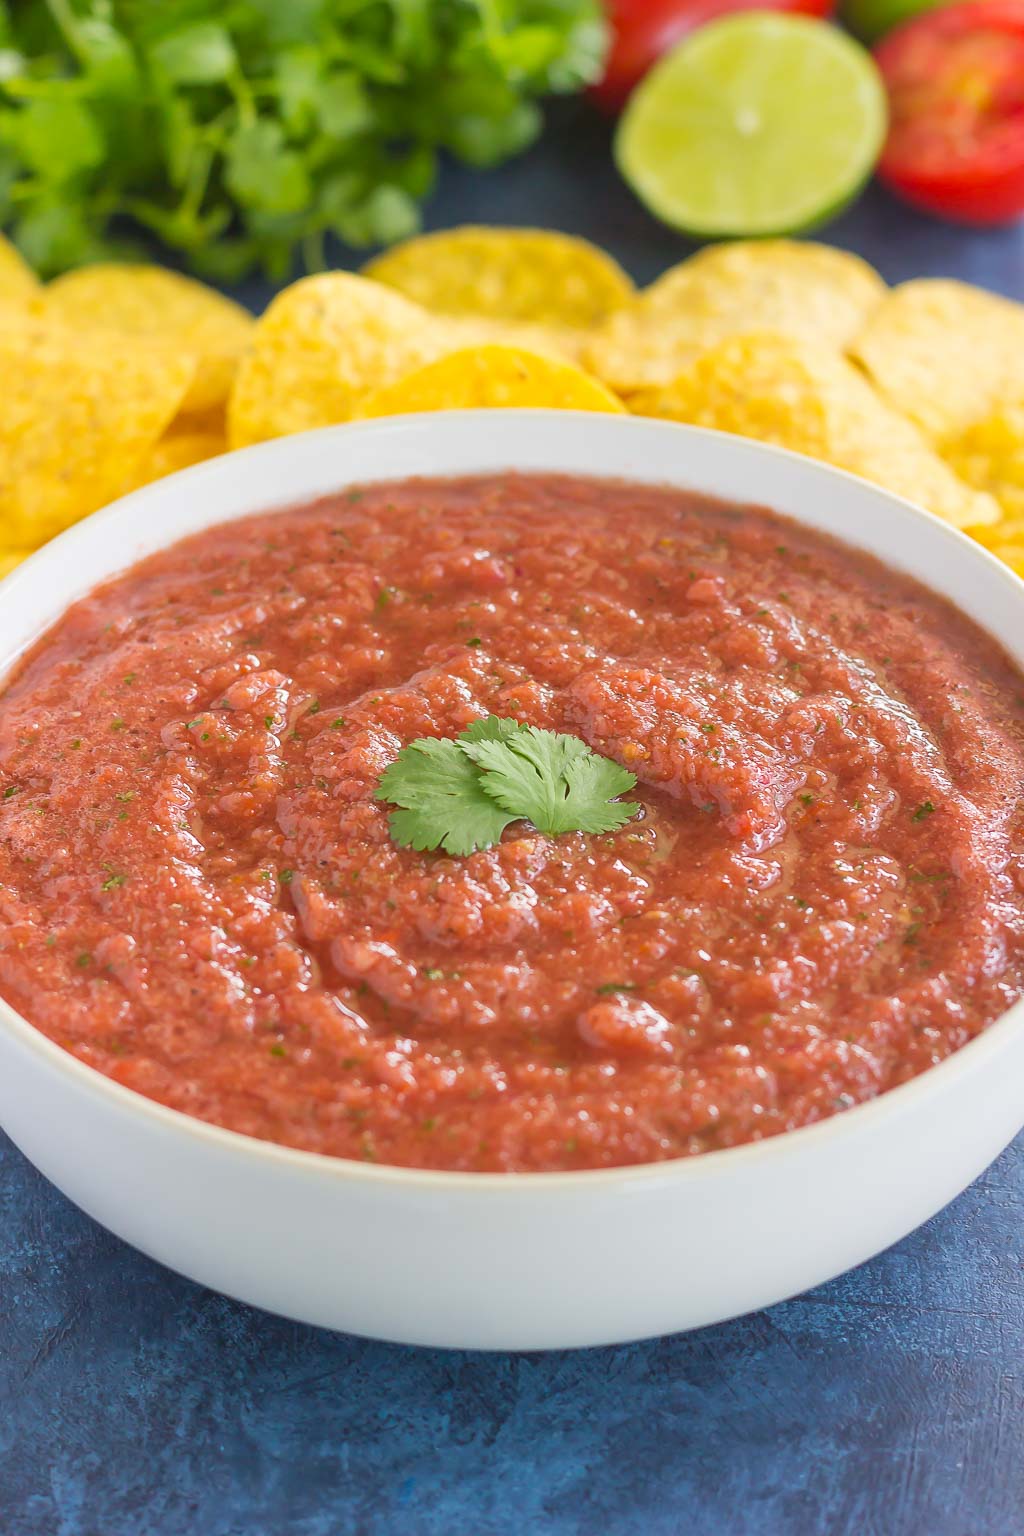 tortilla chips and bowl of restaurant style salsa